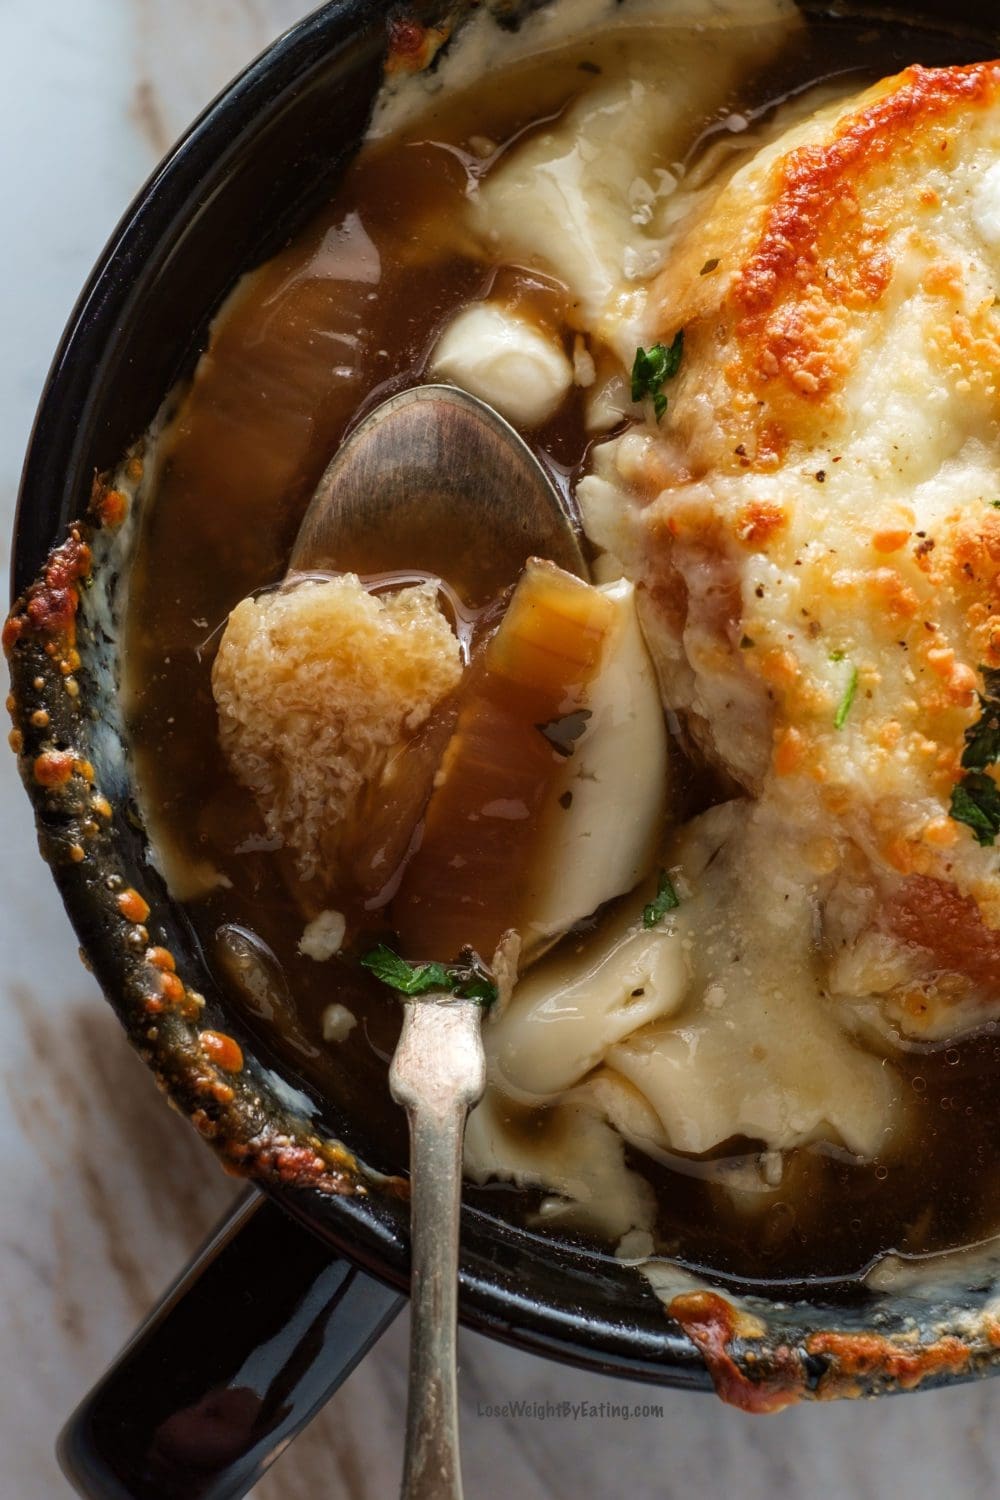 How to Make Healthy French Onion Soup